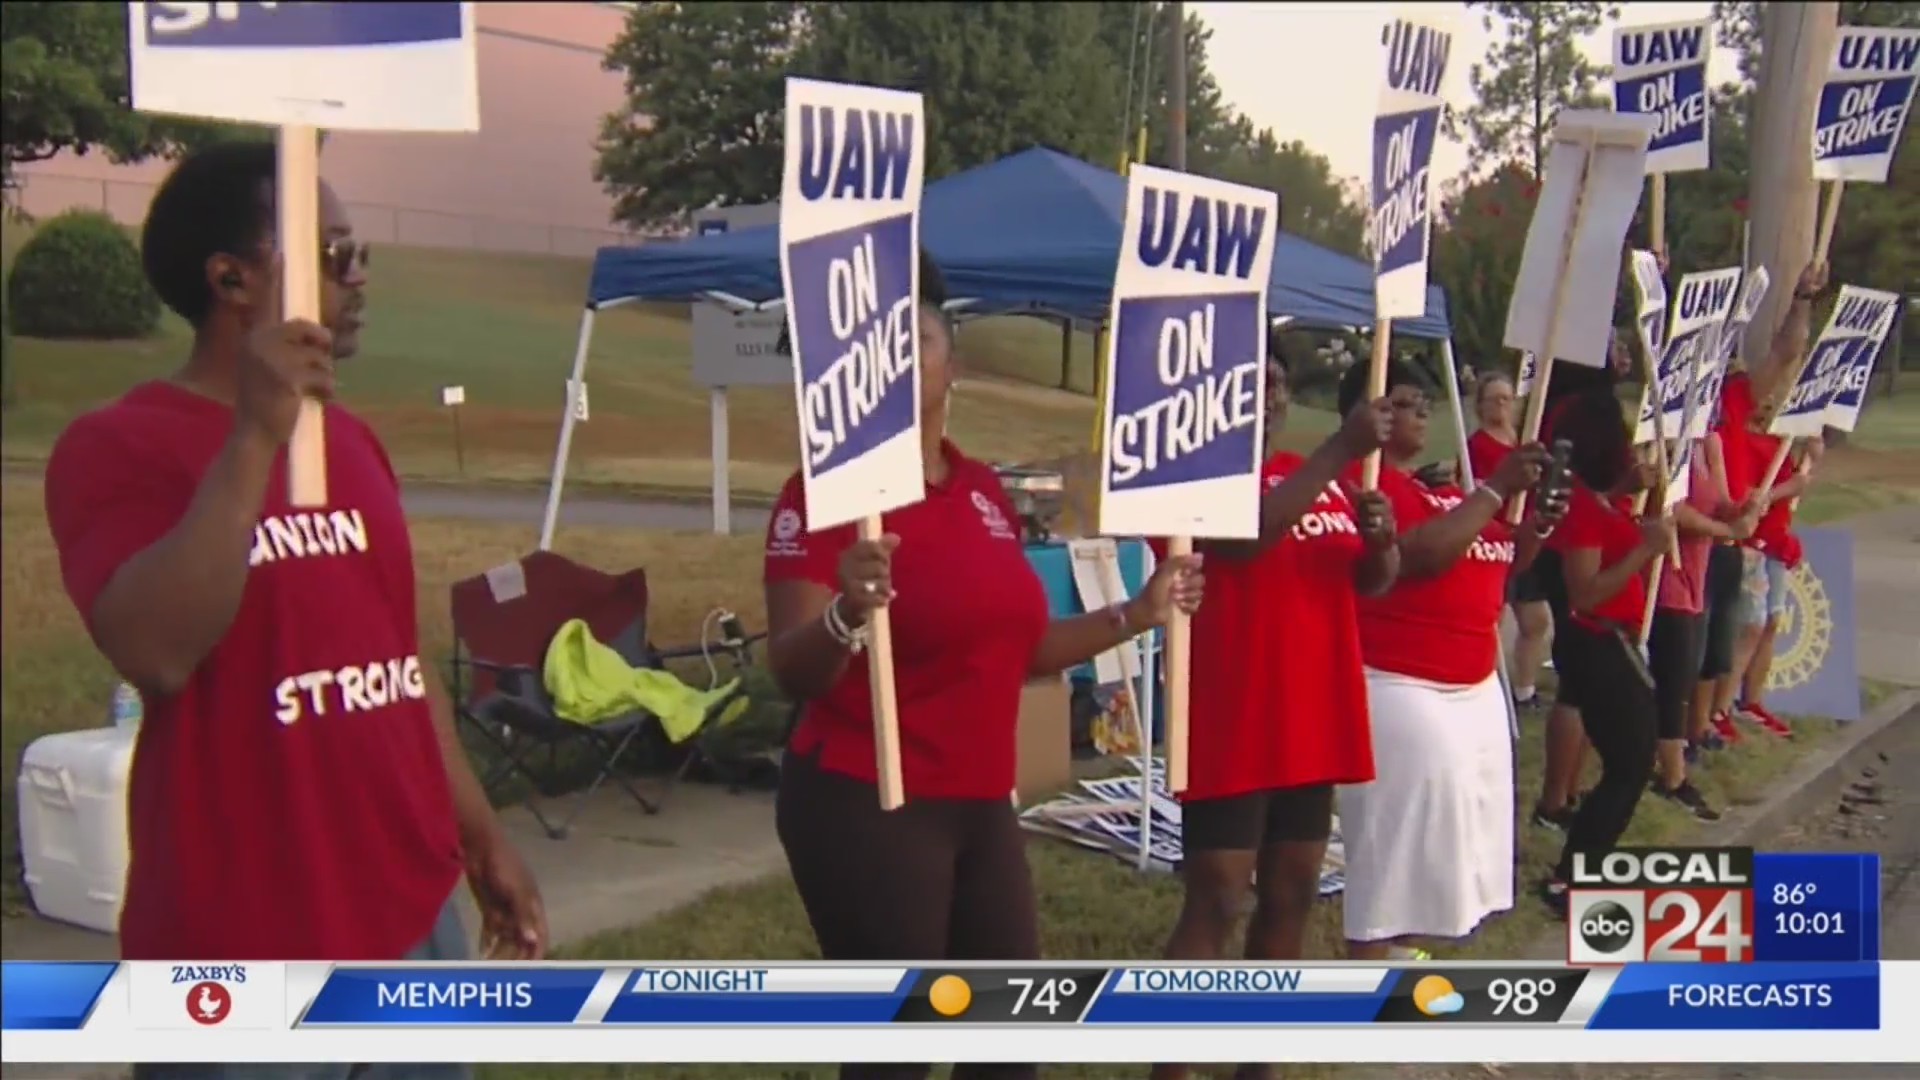 United Auto Workers say they will strike until a fair agreement is reached with General Motors